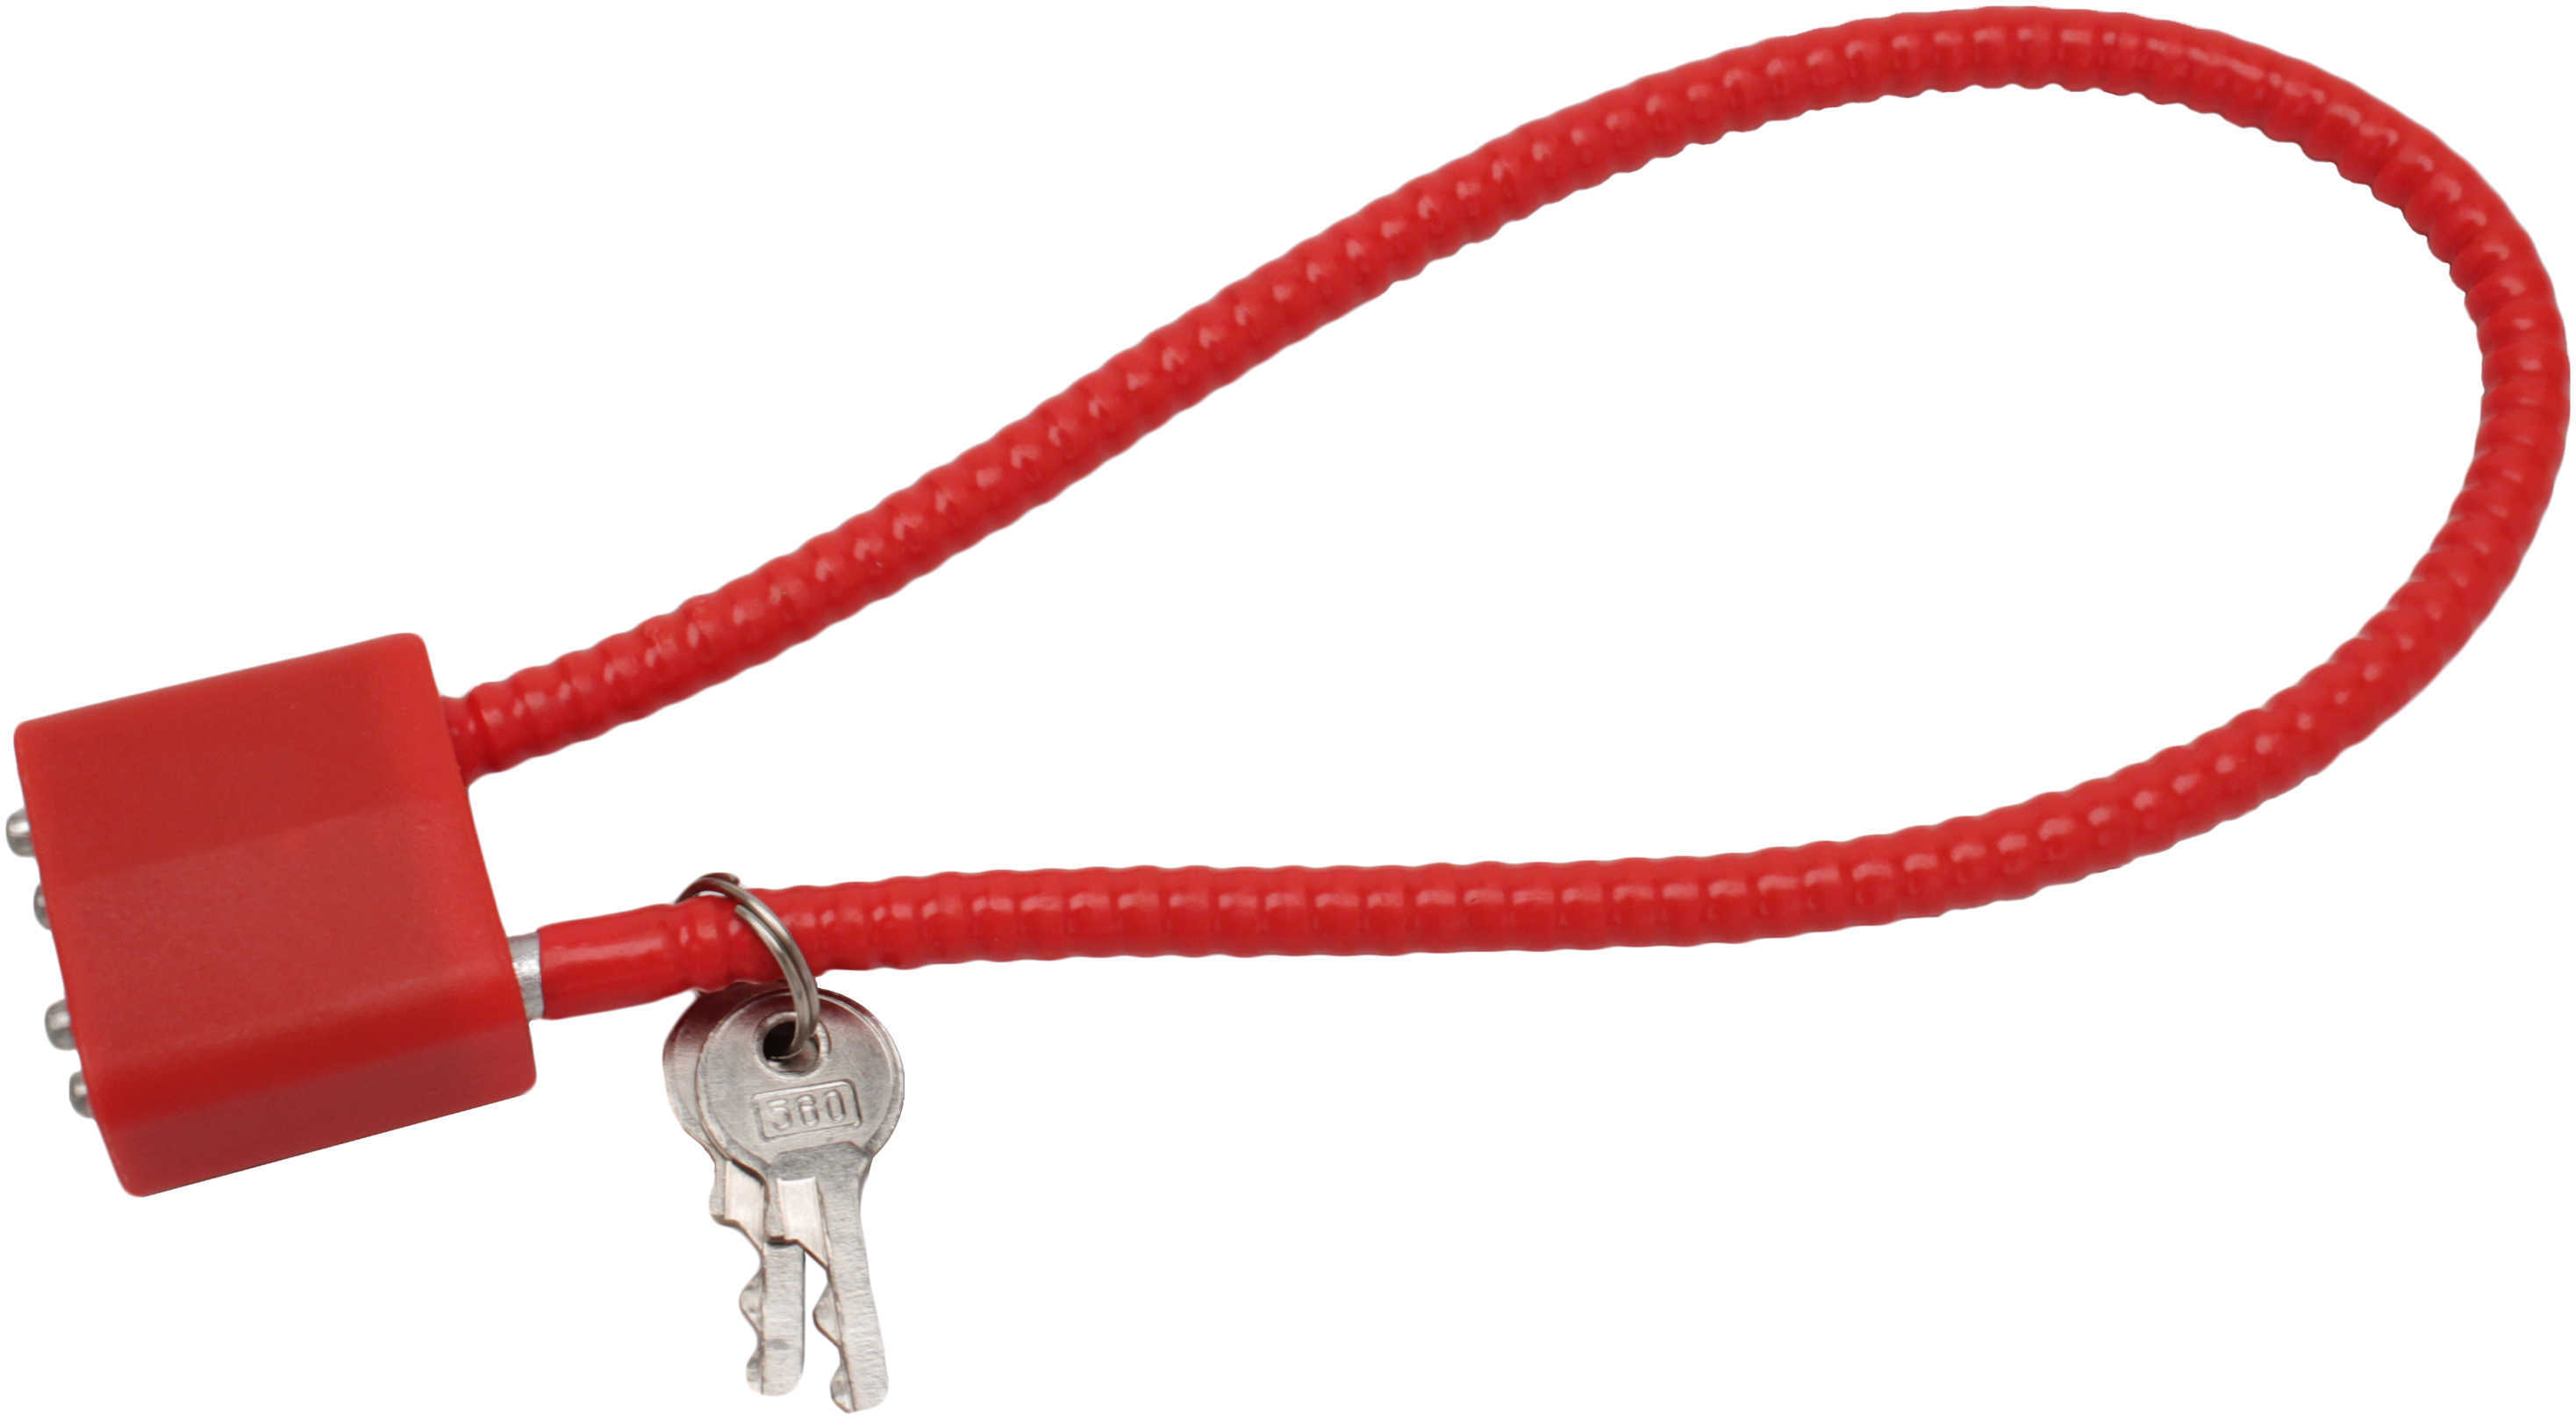 Gunmaster DAC 15" CA DOJ Approved Cable Lock Red Md: Cl012014